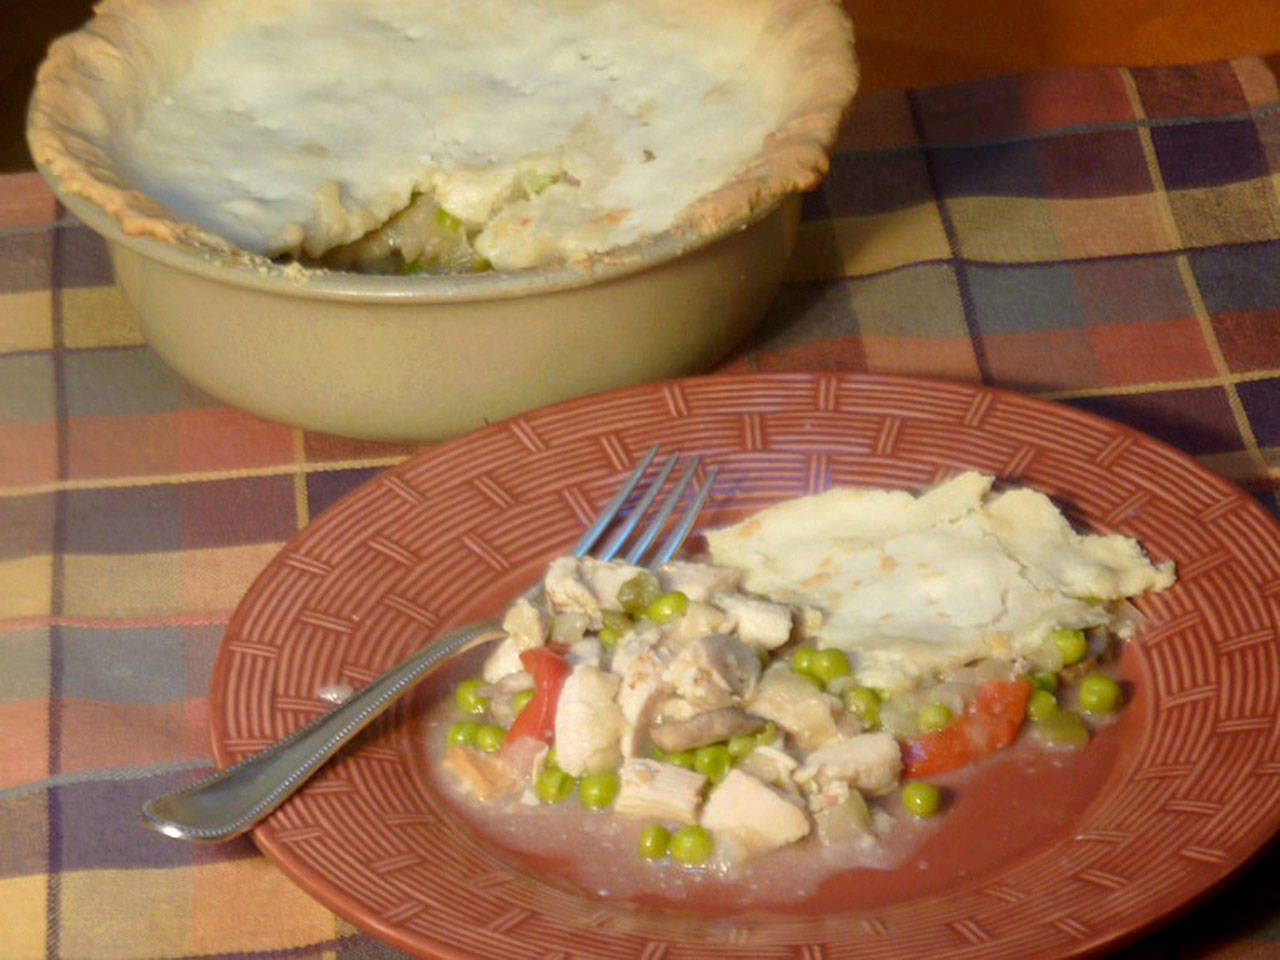 Warm and comforting, turkey pot pie is a great way to use leftover Thanksgiving turkey. (Linda Gassenheimer)